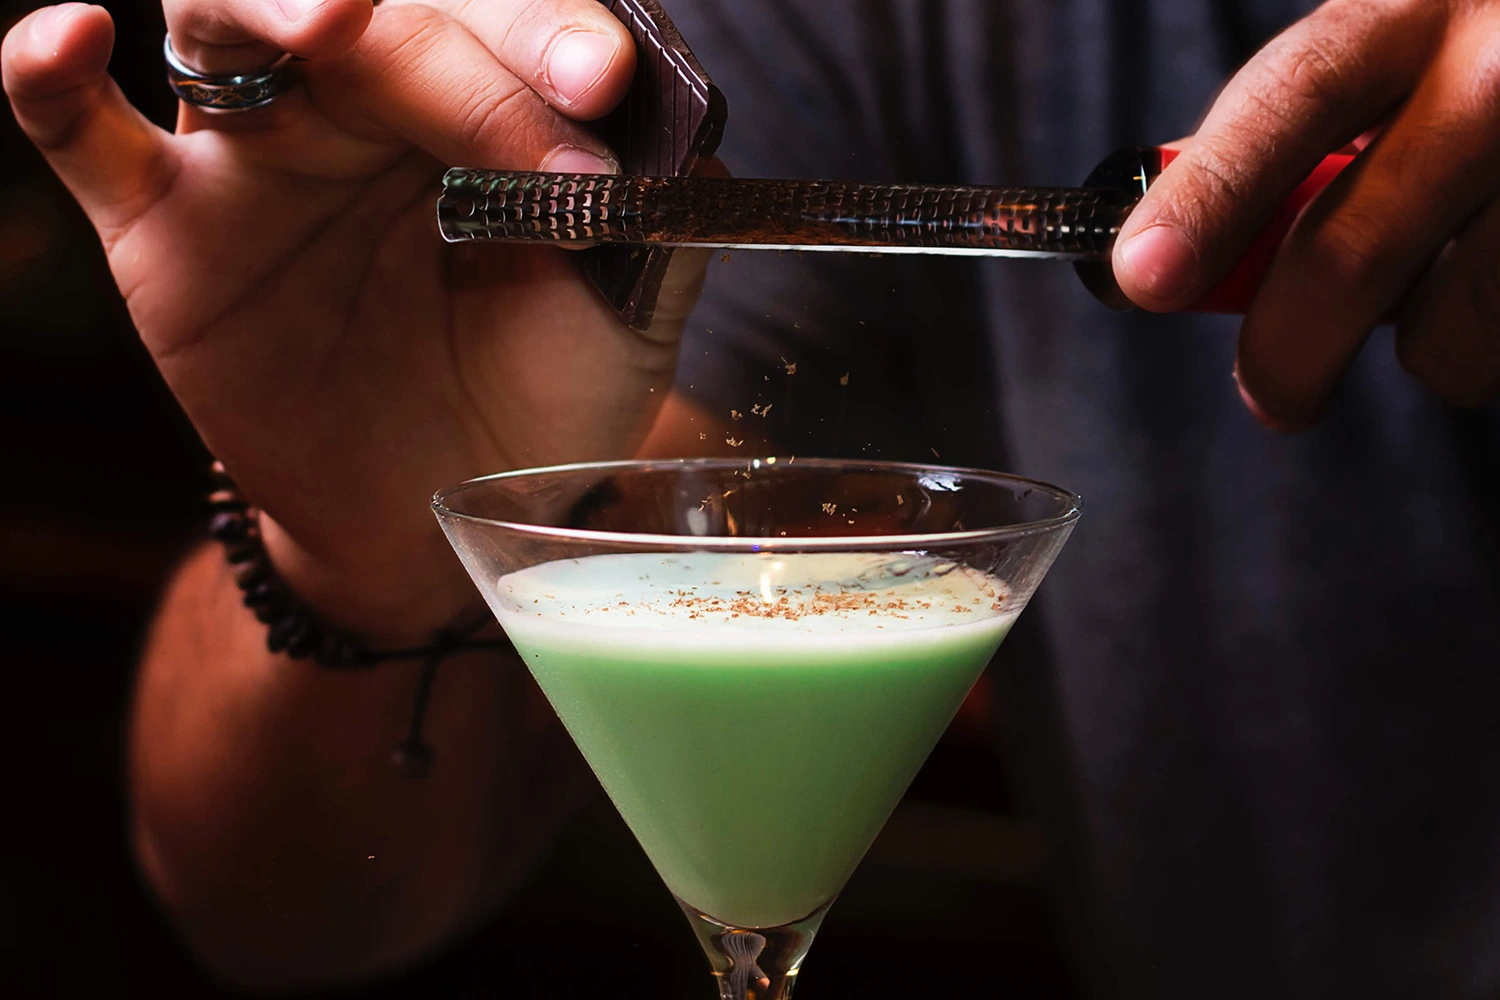 A person is making a green drink in a glass to increase restaurant loyalty.